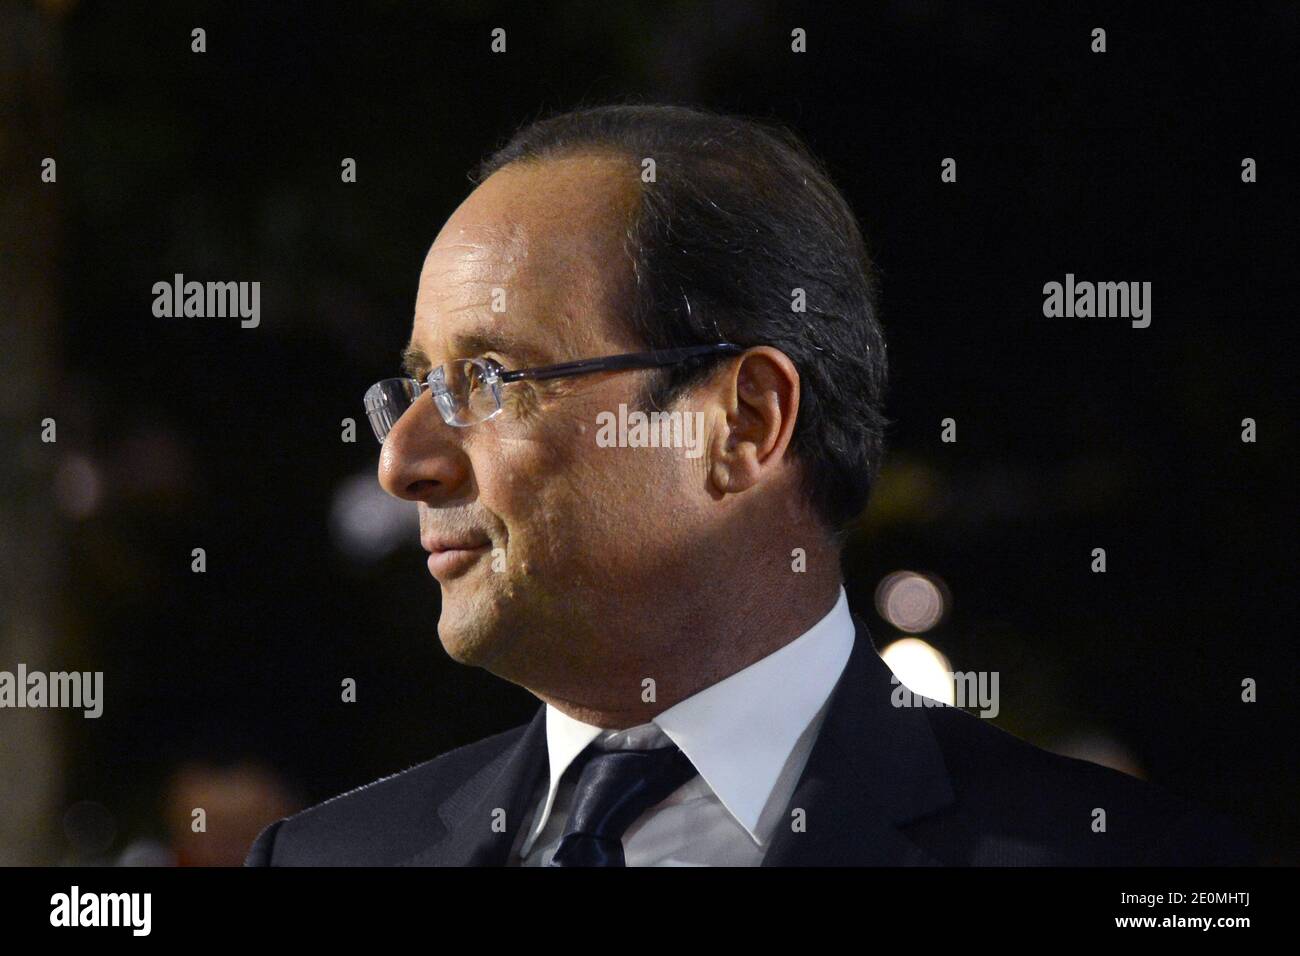 French President Francois Hollande speaks to members of the press during his visit to Ground Zero 911 Memorial Park on September 25, 2012, New York, NY, USA. Photo by Anthony Behar/Pool/ABACAPRESS.COM Stock Photo